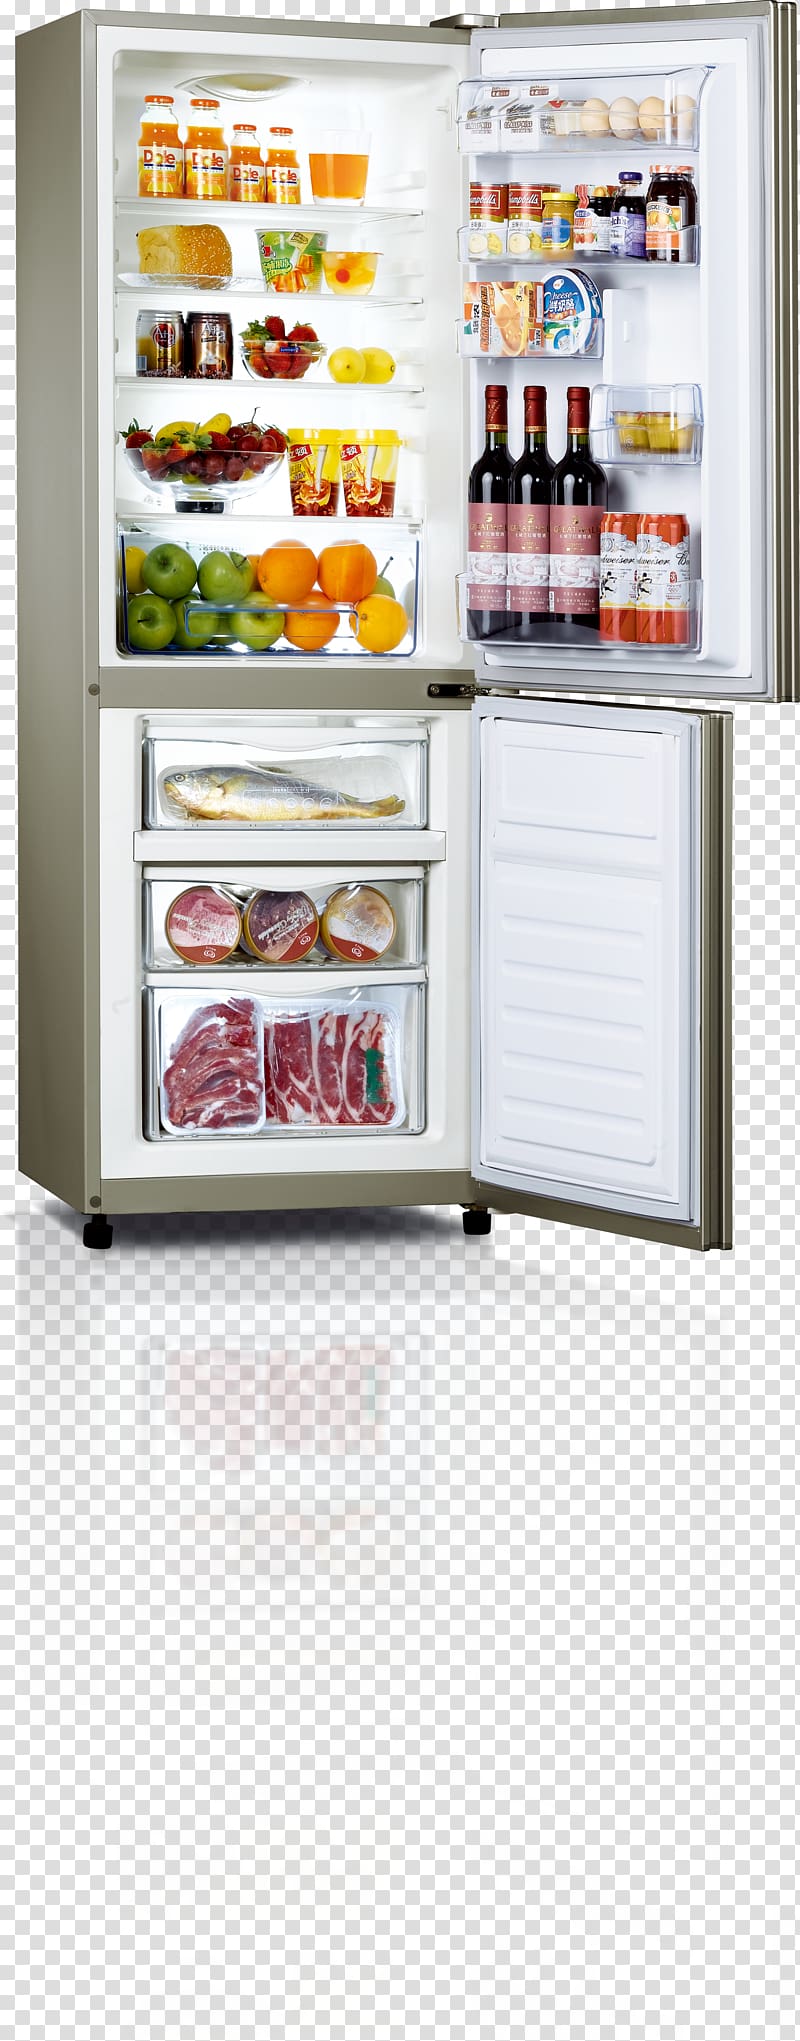 Refrigerator Air freshener Solar air conditioning Air purifier Tmall, refrigerator transparent background PNG clipart